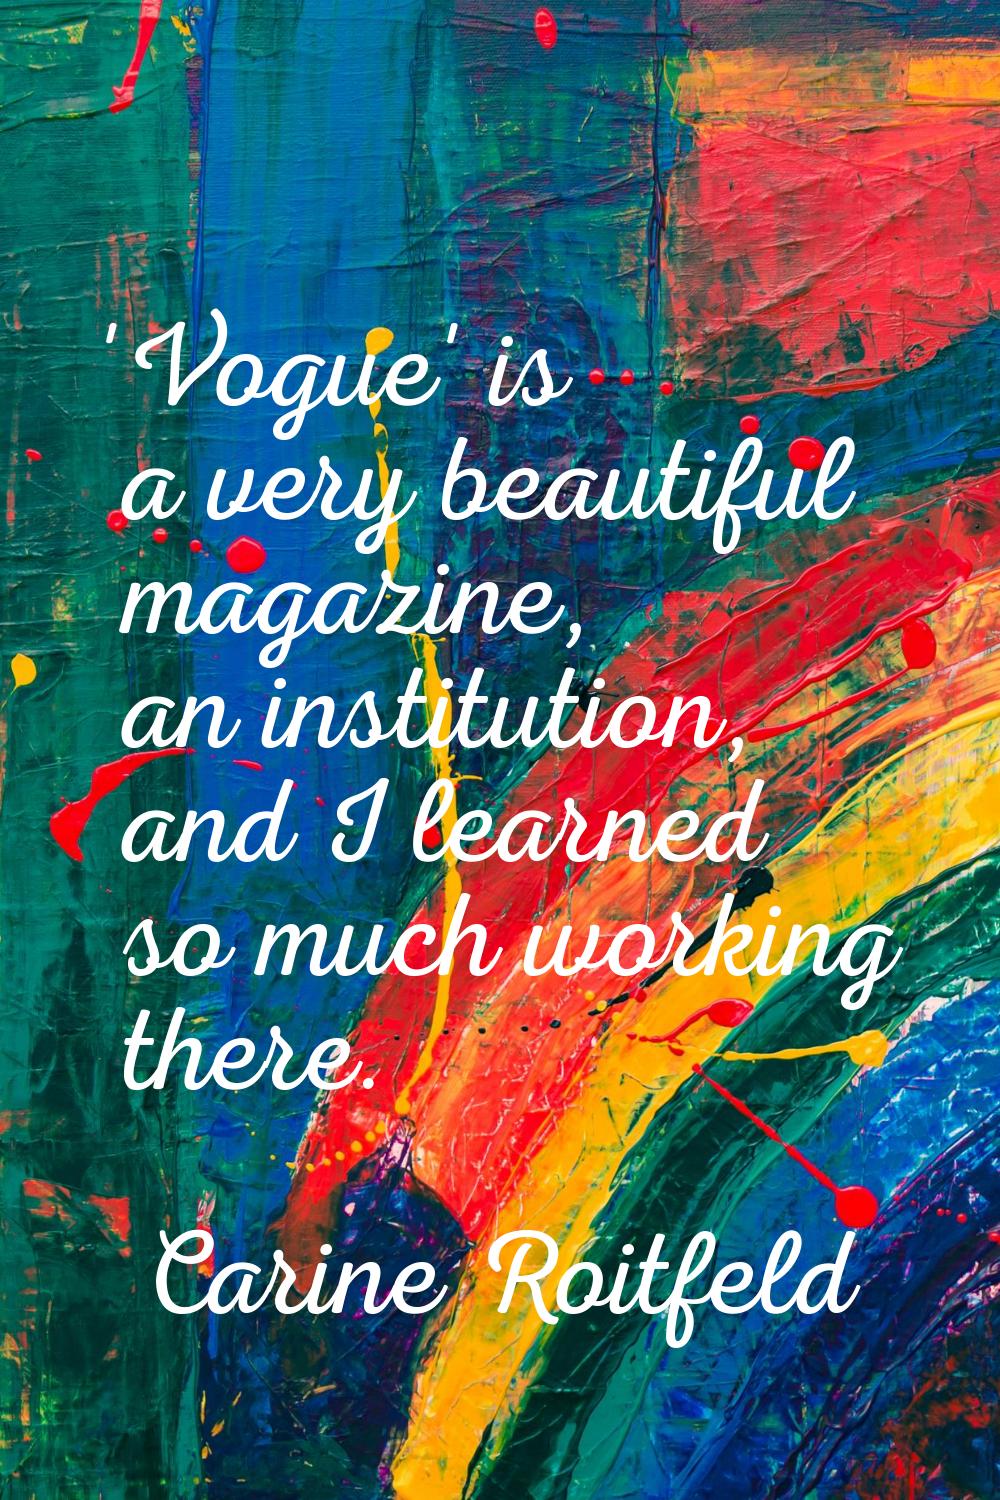 'Vogue' is a very beautiful magazine, an institution, and I learned so much working there.